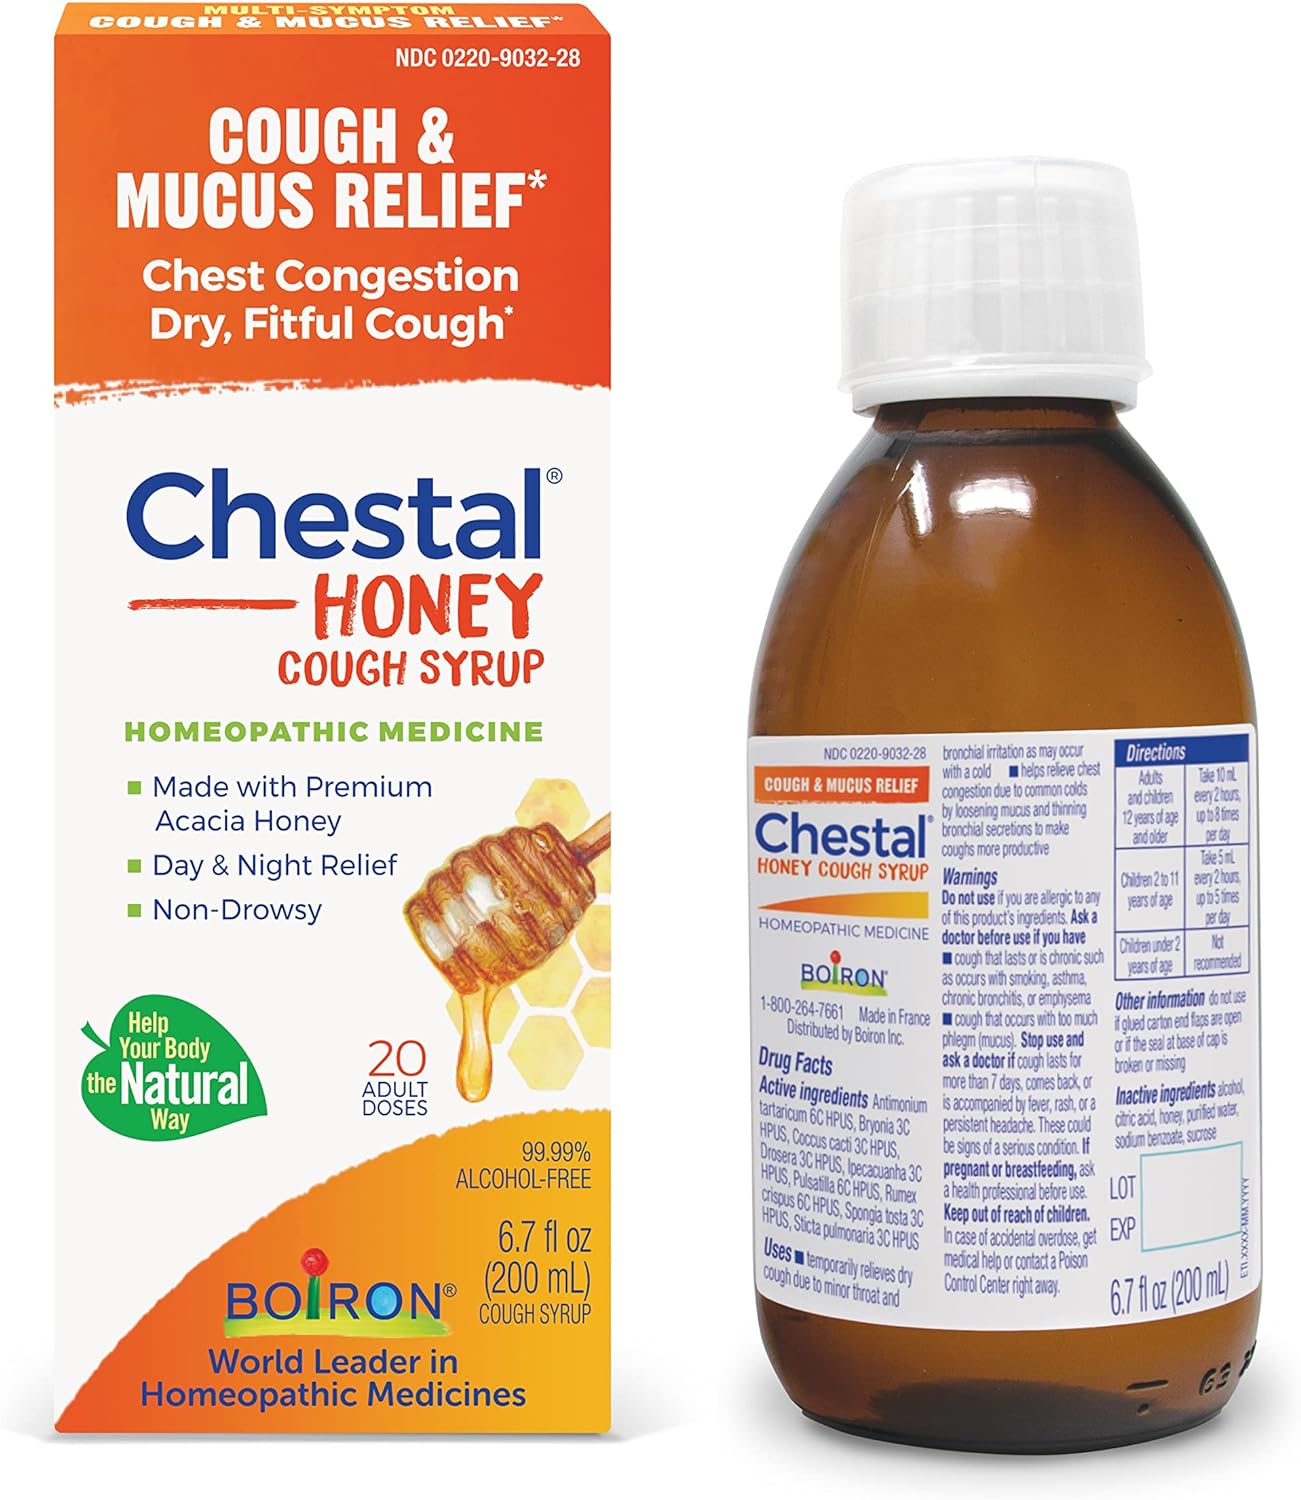 Boiron Chestal Honey Adult Cold and Cough Syrup 6.7 Fl oz